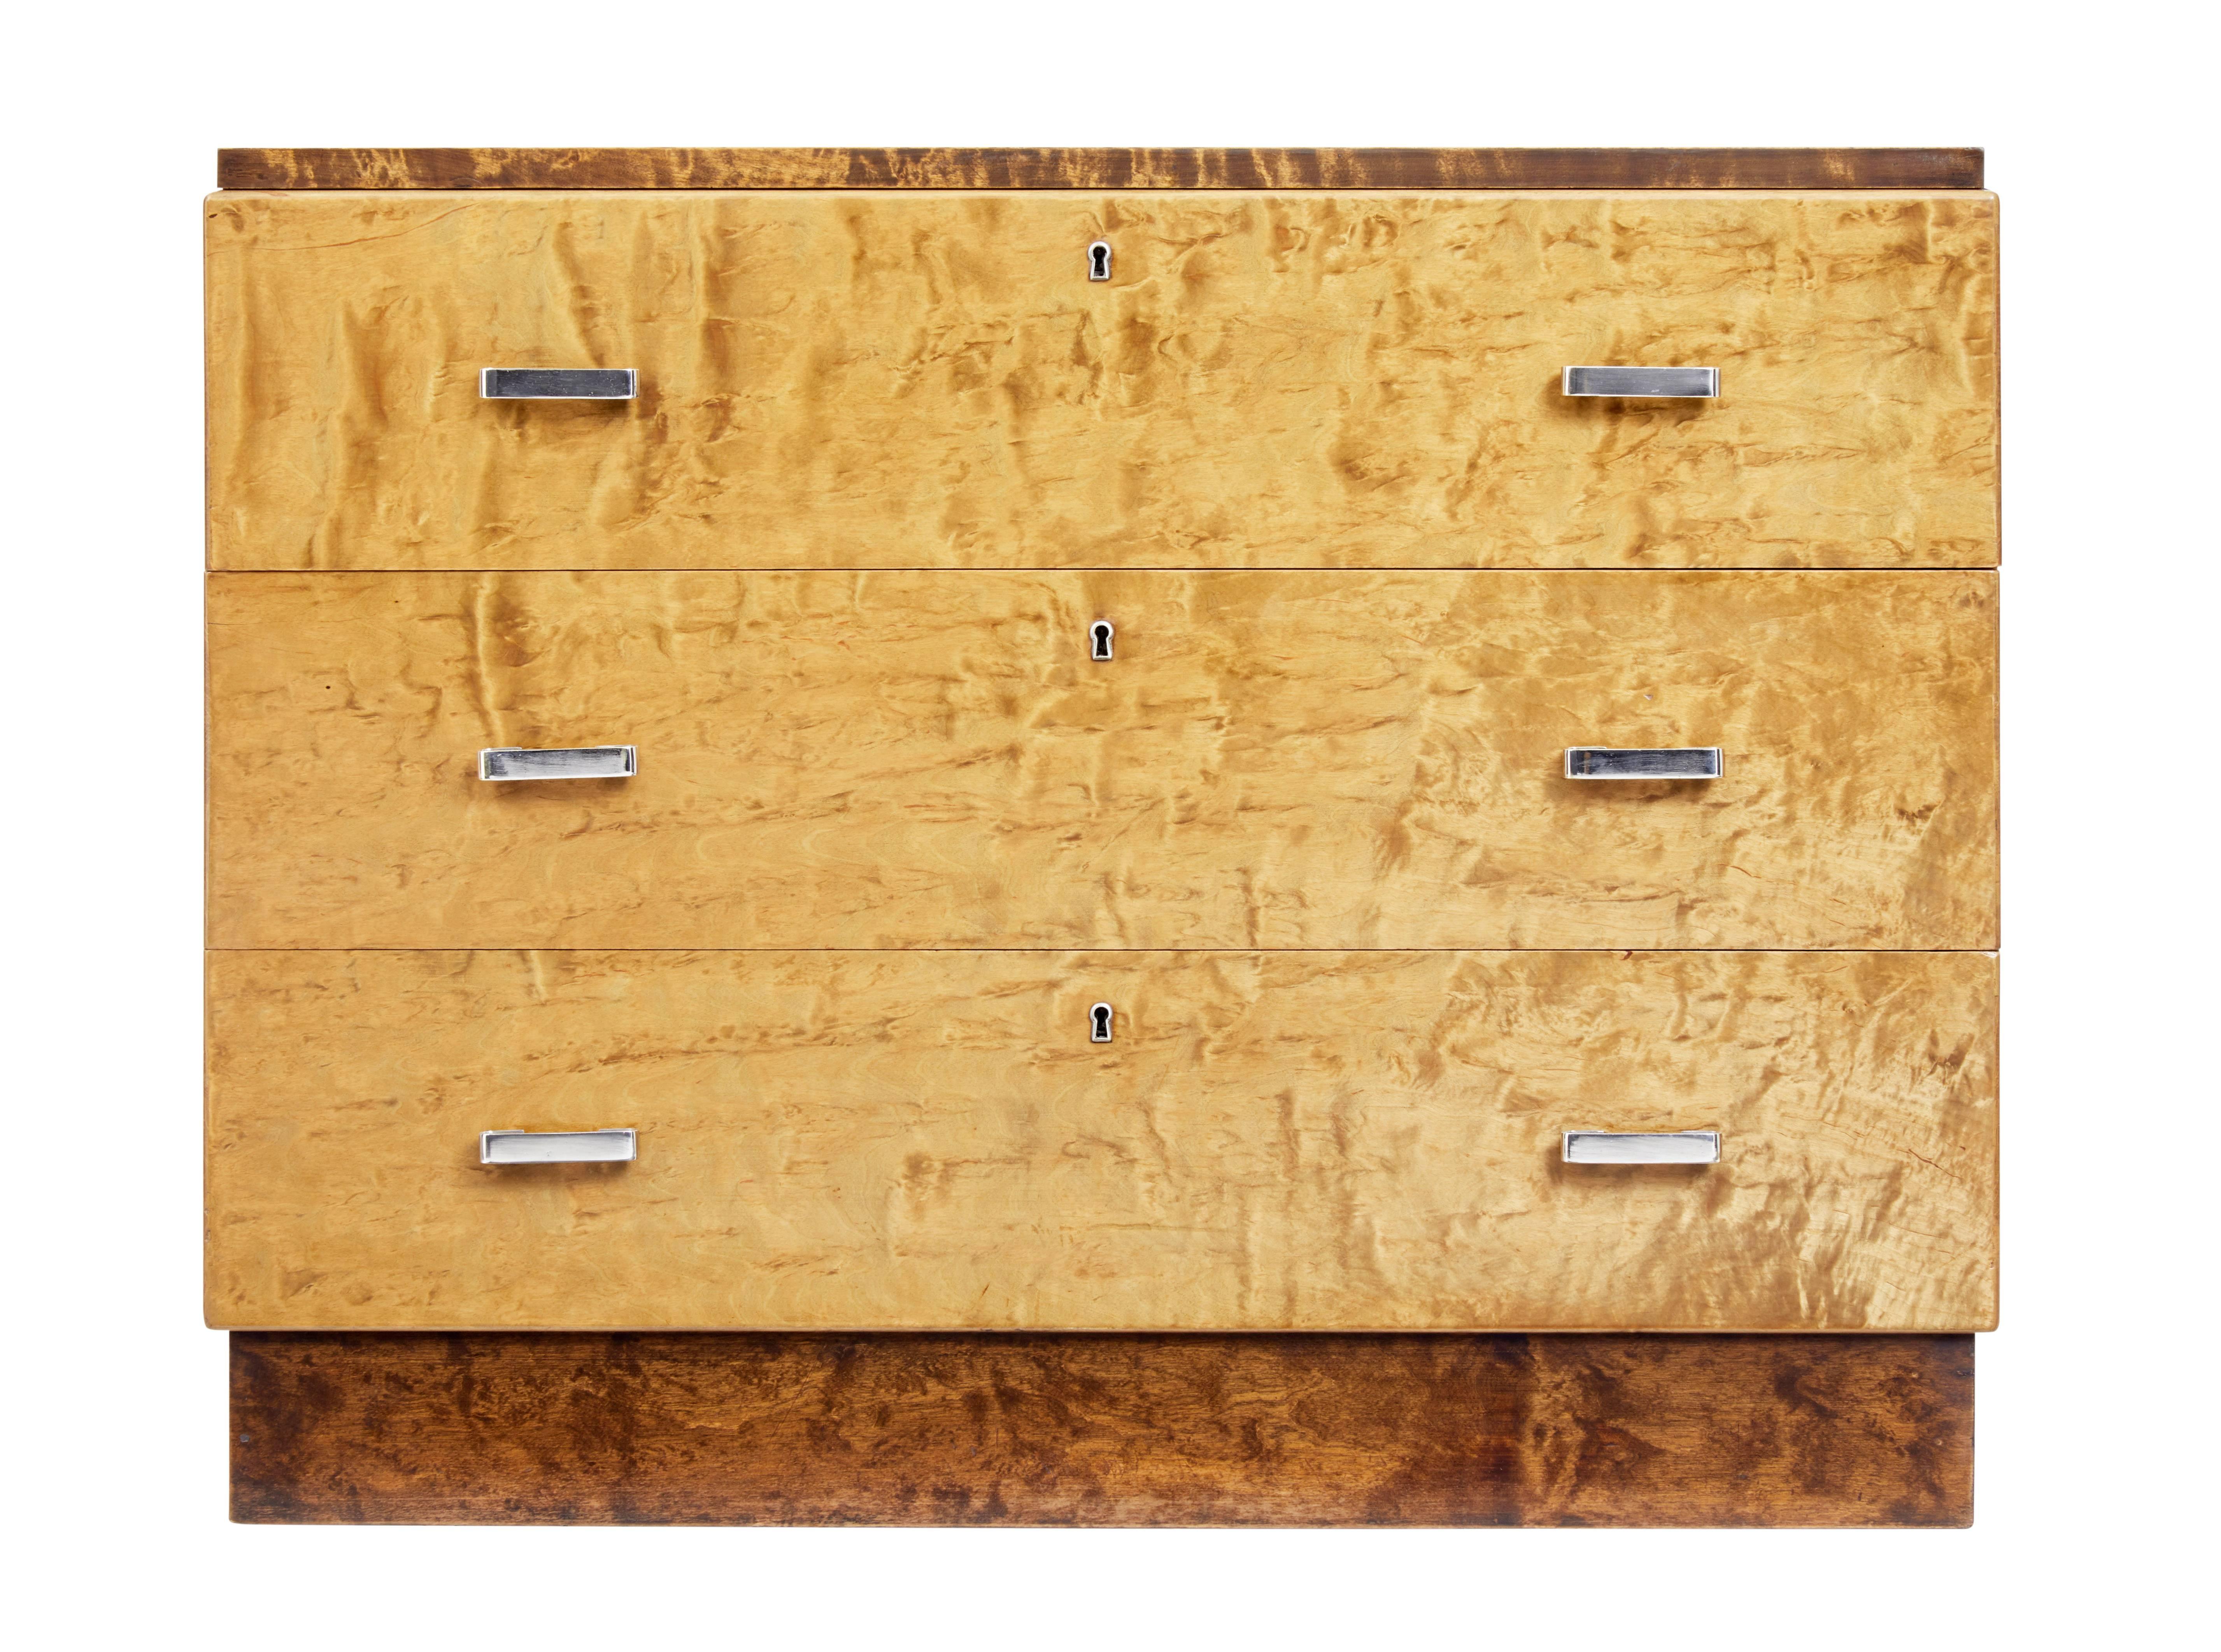 Art deco period chest of drawers, circa 1930.

Two-tone burr birch effect, with the darker top and plinth contrasting with the main body.

Three drawers with original polished steel handles.